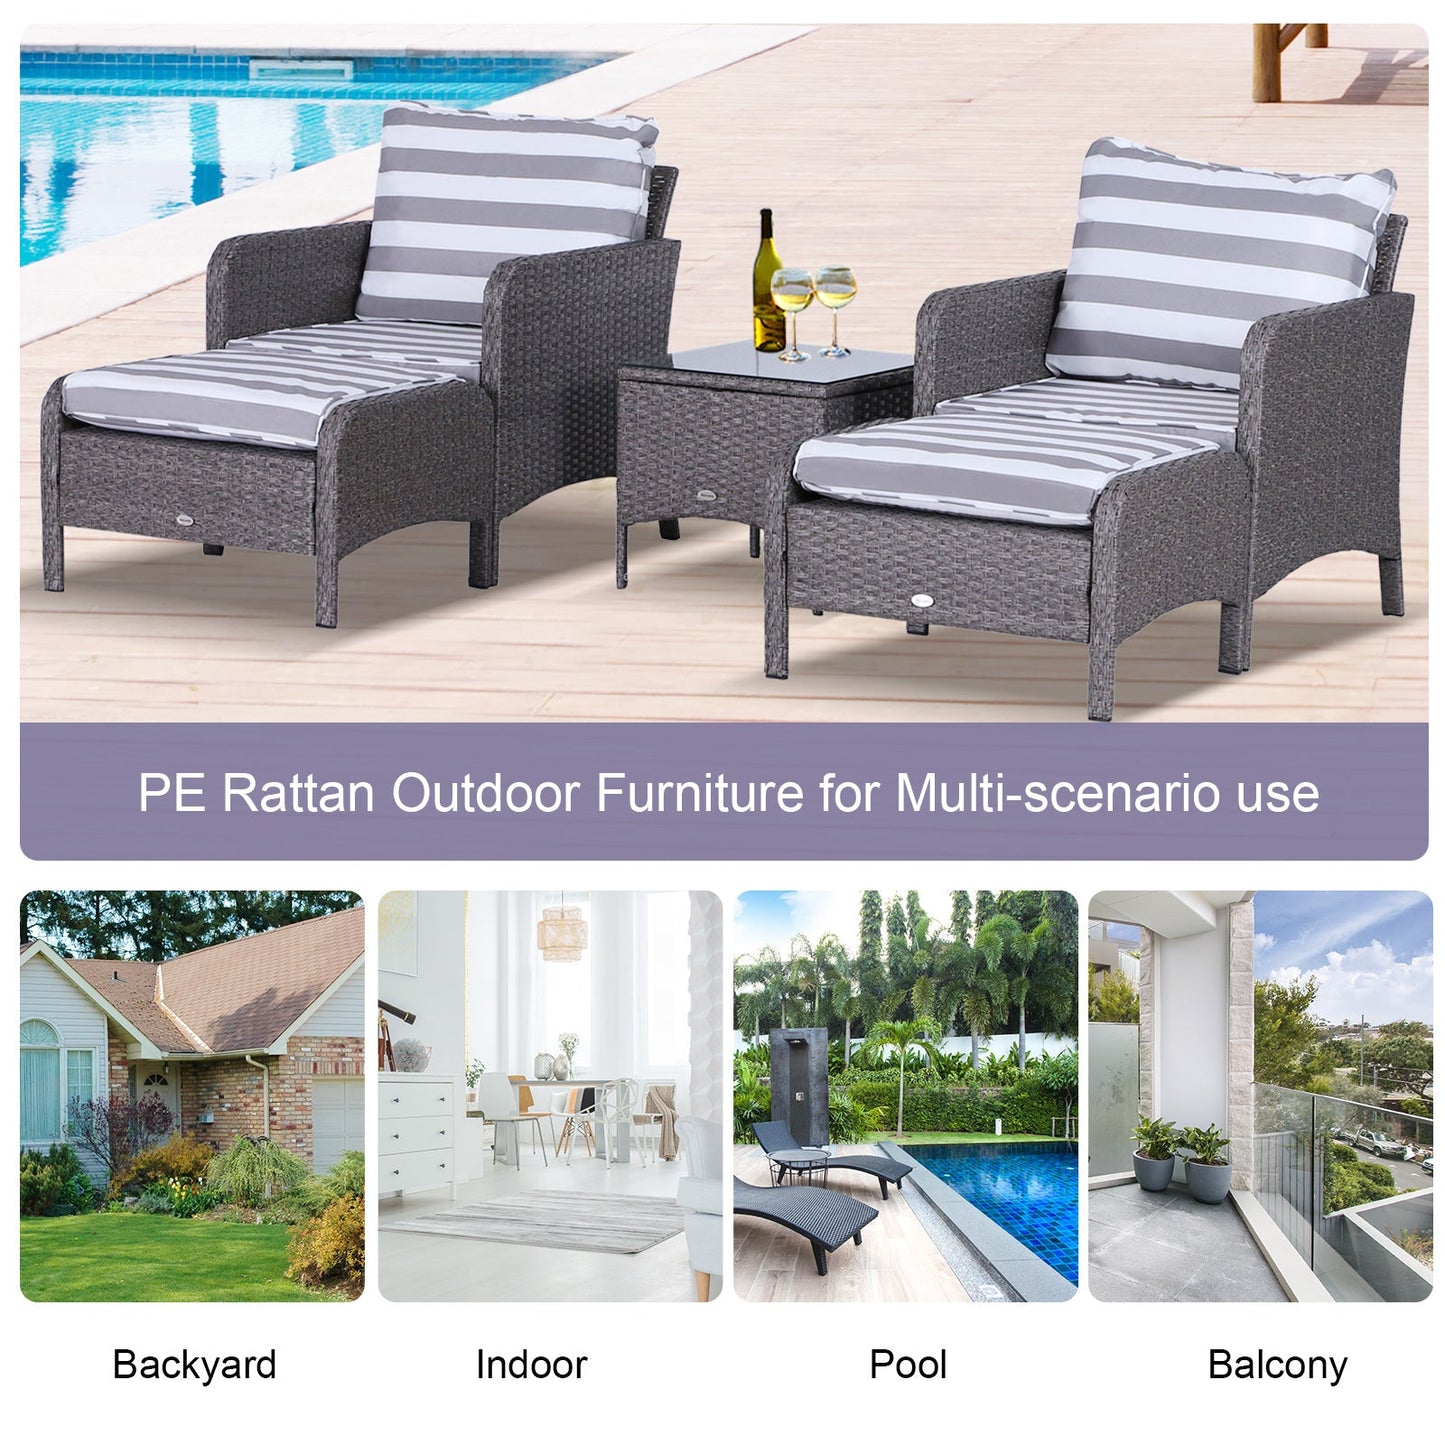 Outsunny Rattan Garden Set: 2 Seater with Armchairs, Stools, Glass-Top Table, Cushions, Wicker Weave, Outdoor Seating